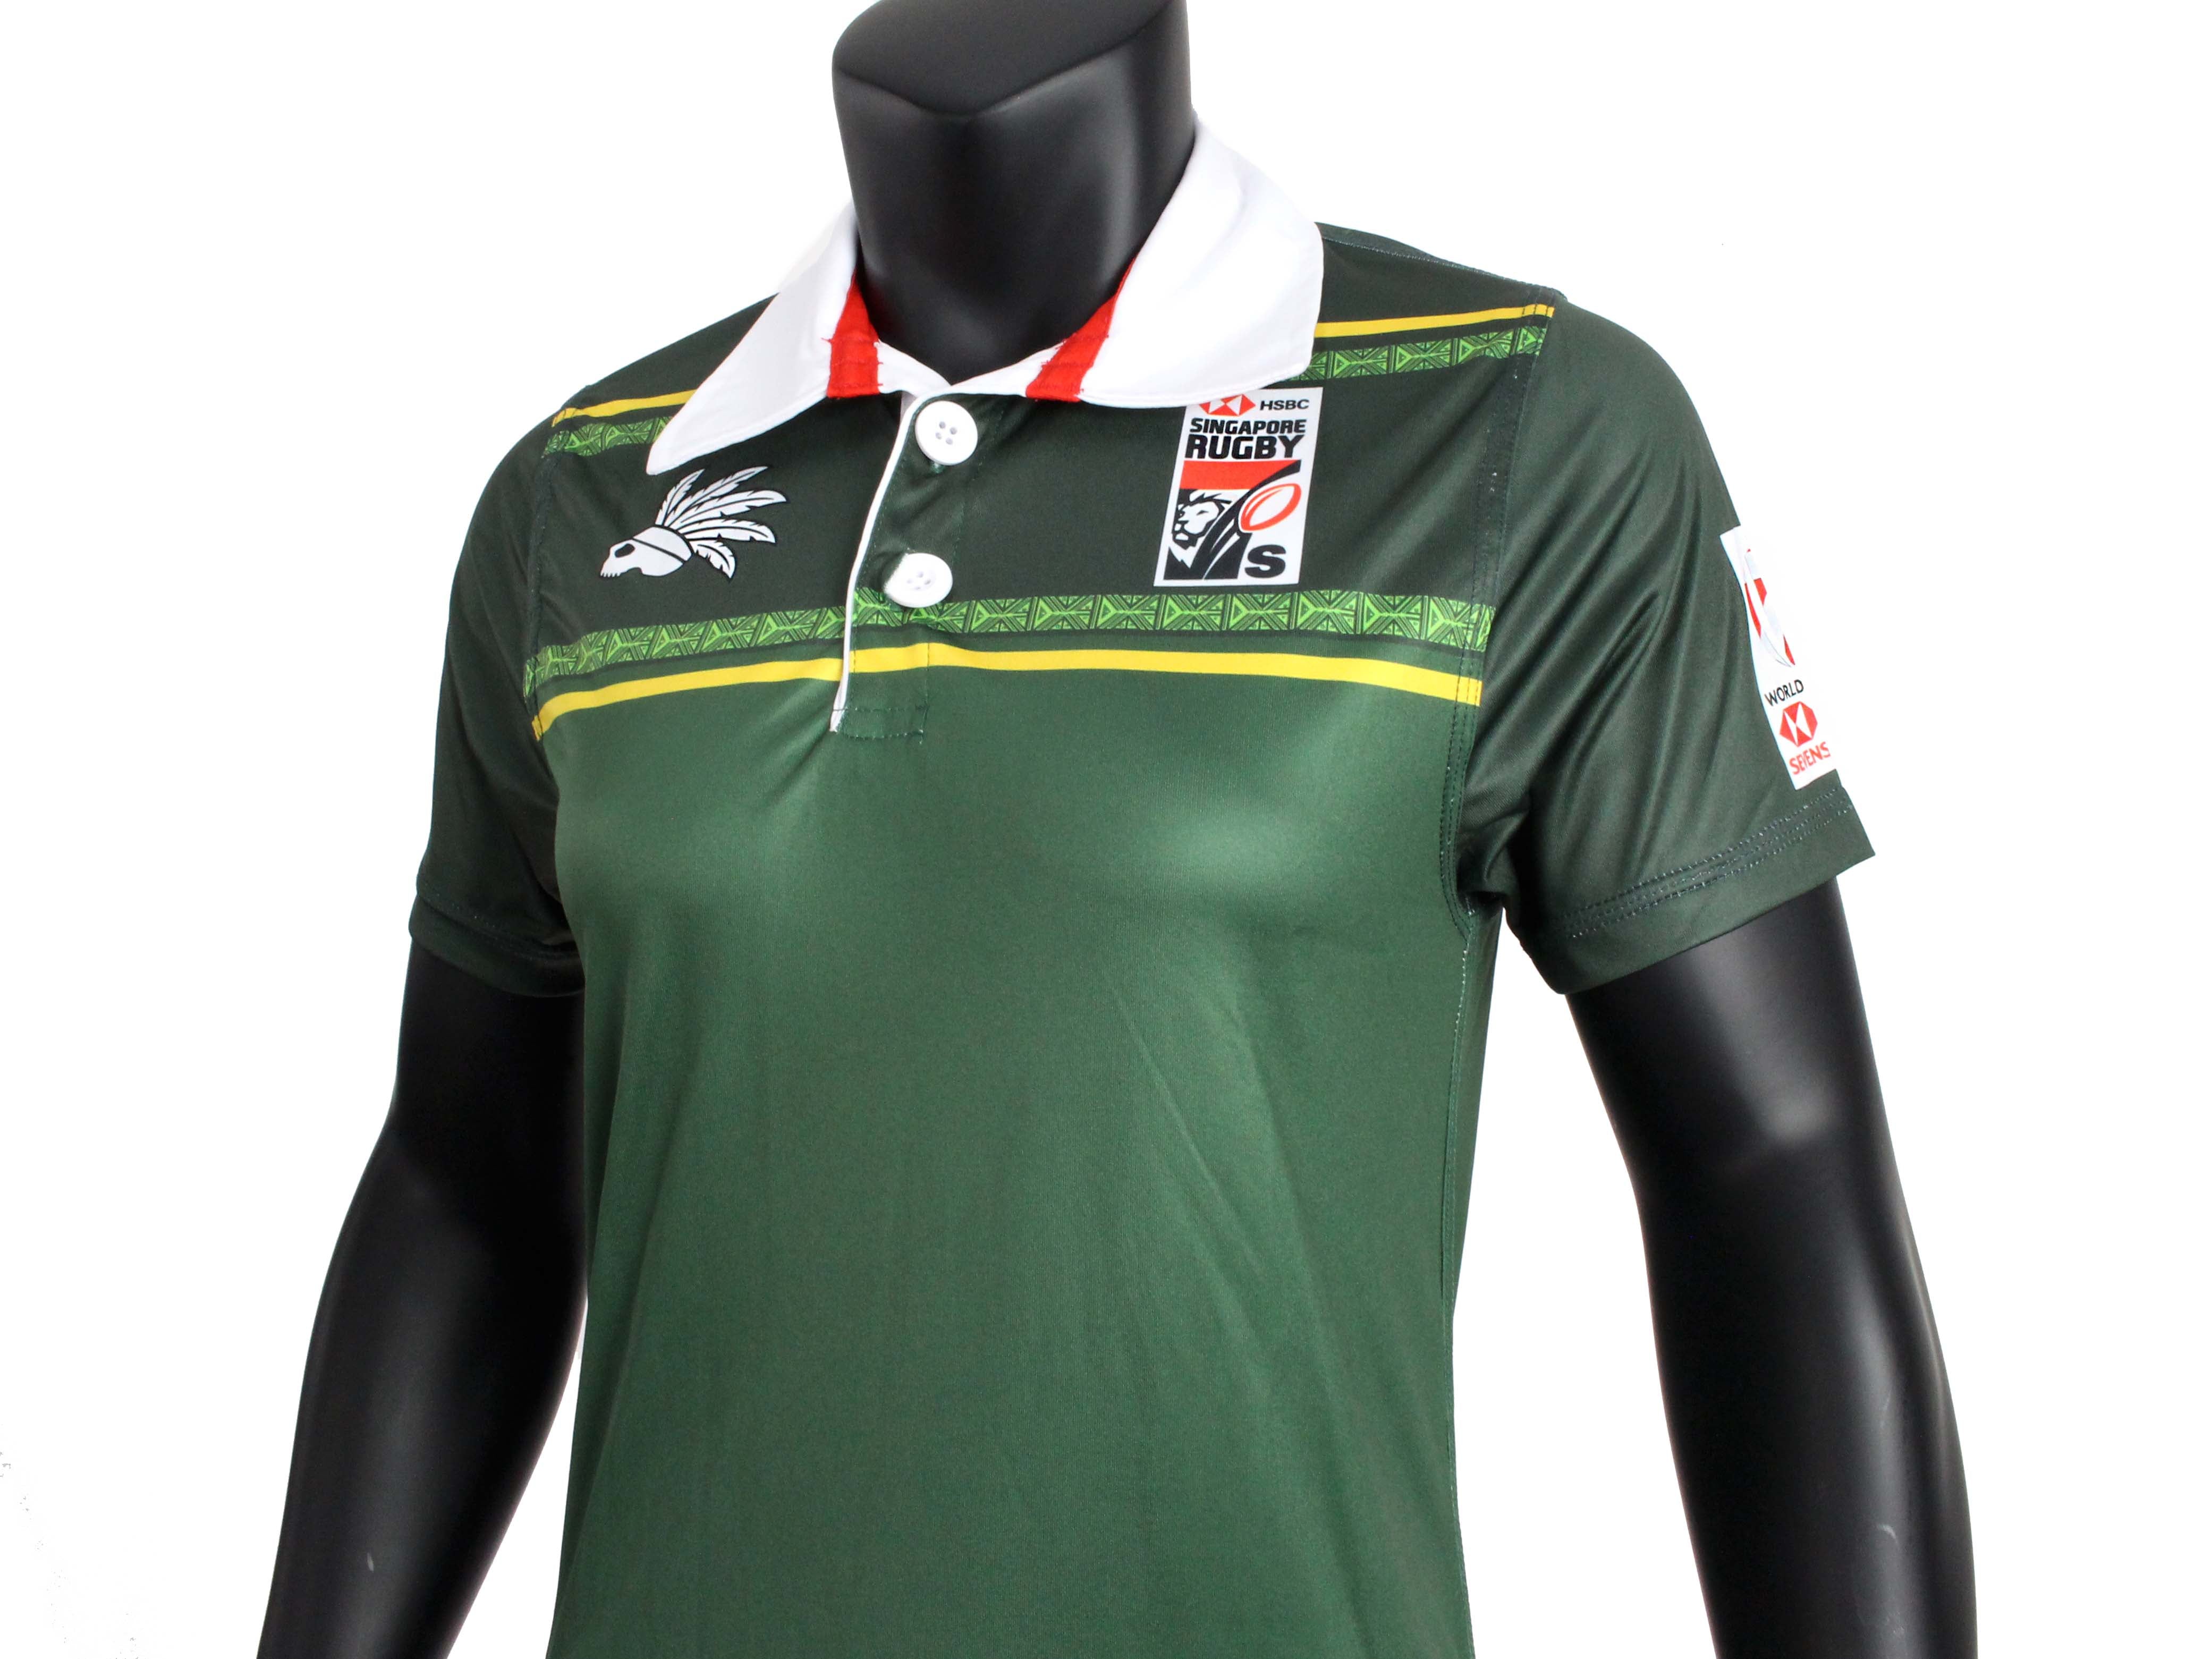 SOUTH AFRICA RUGBY POLO